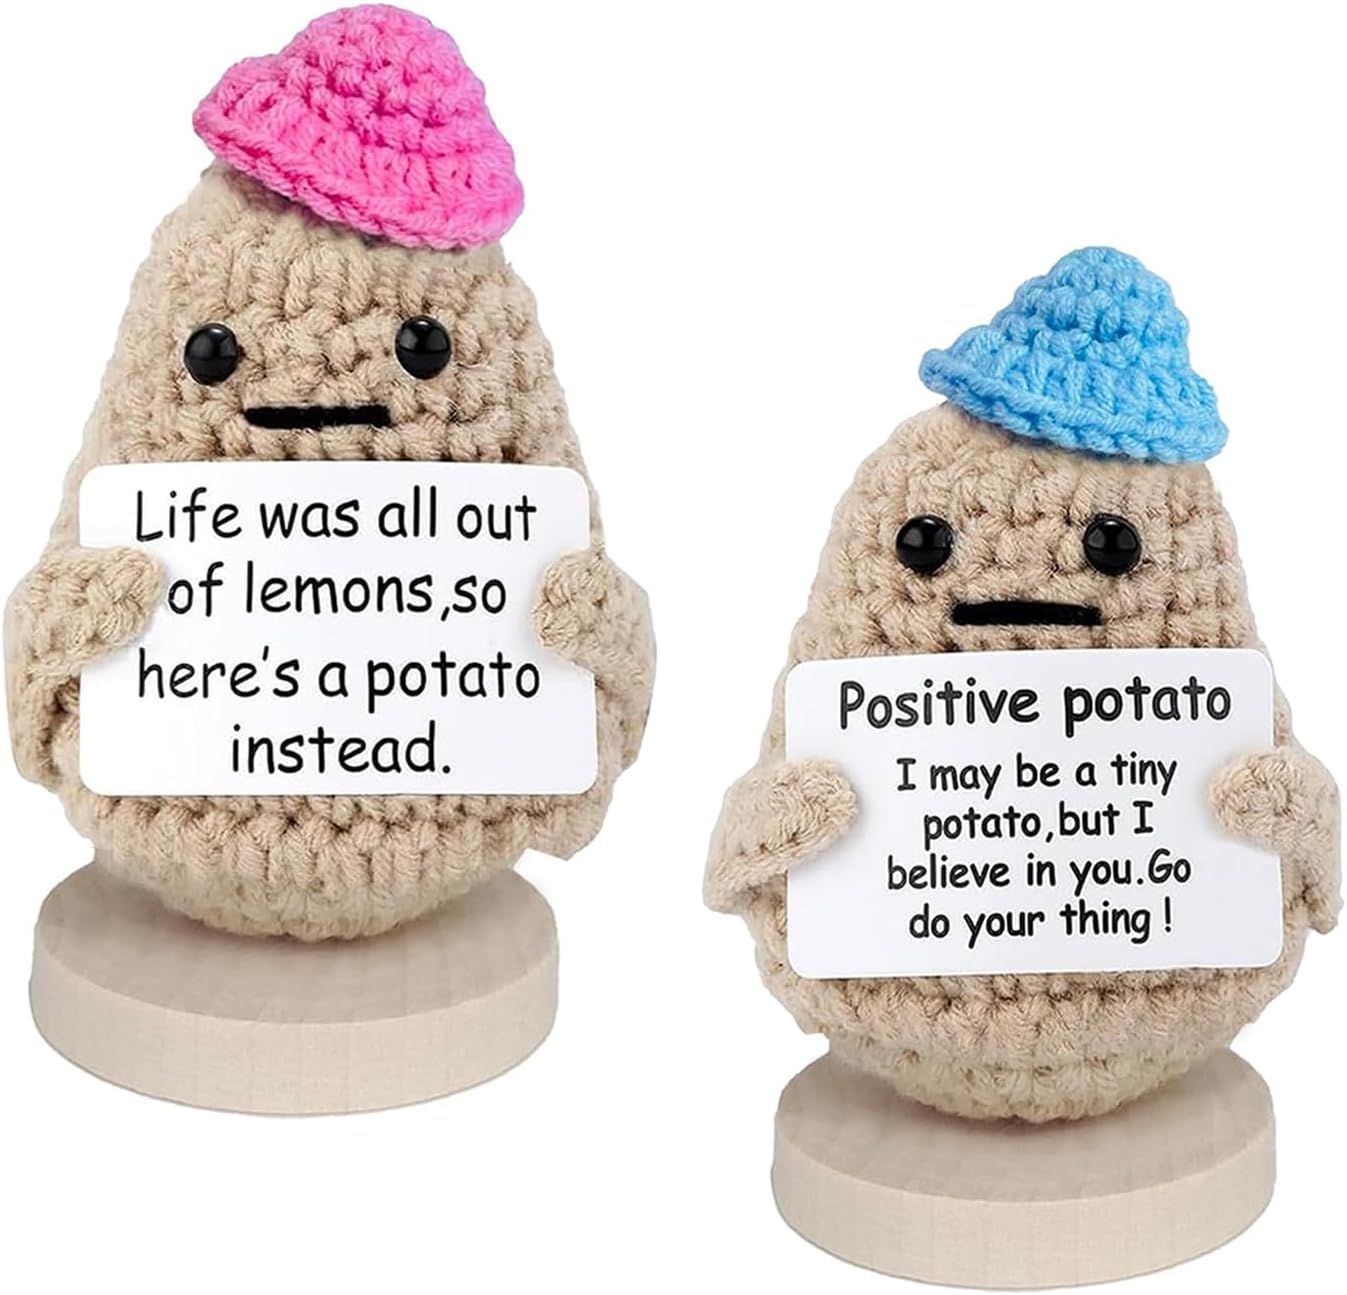  6 Sets Positive Potato Bulk Emotional Support Potato with  Positive Cards and Bags, Cute Crochet Doll Toy, Inspirational Gifts for  Friends : Home & Kitchen